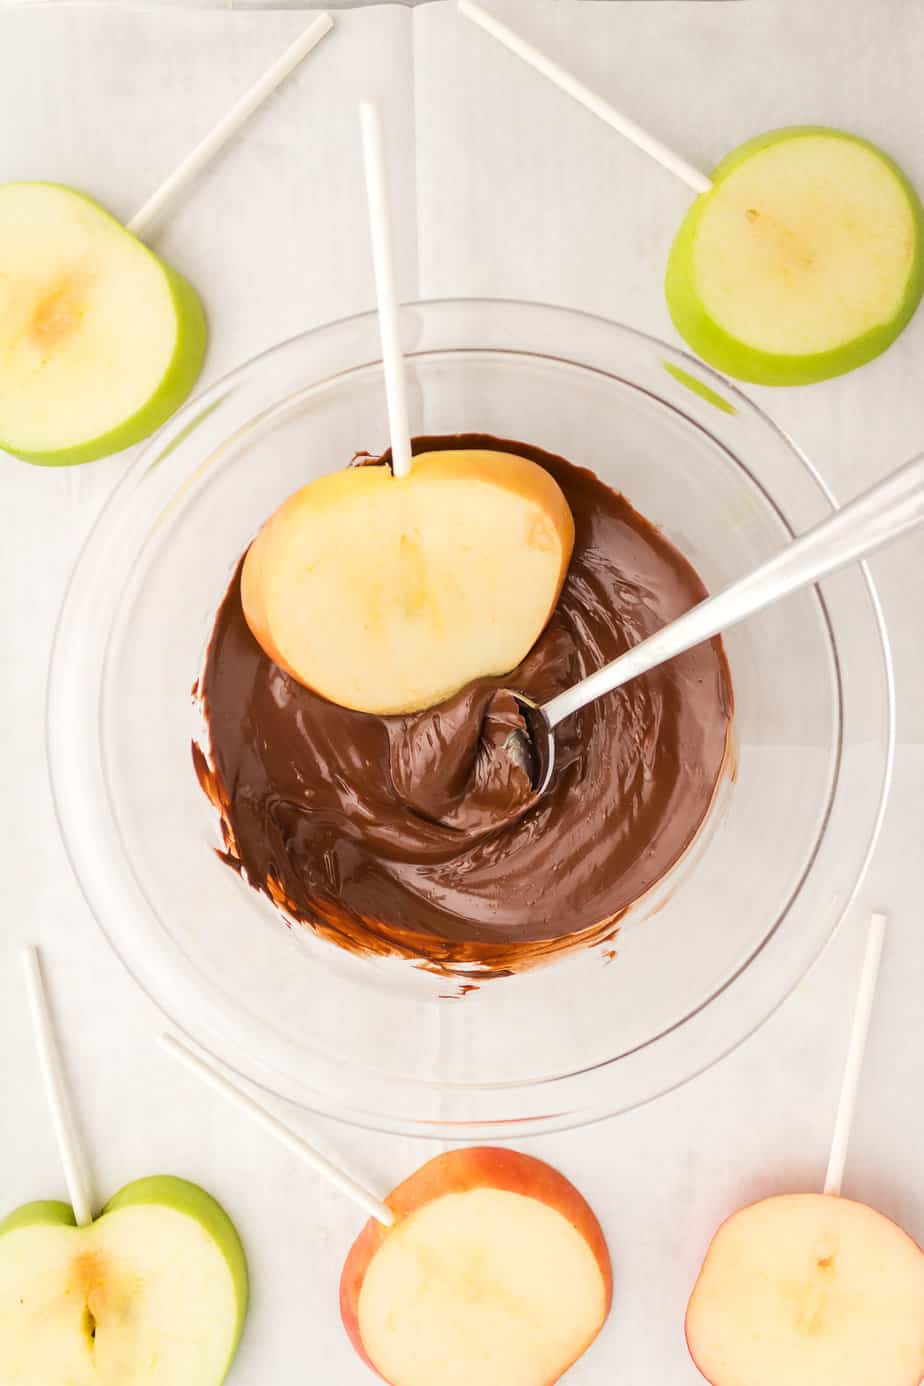 Dipping an apple slice with a stick in a bowl of chocolate with a spoon from overhead with more apple slices on the counter nearby.